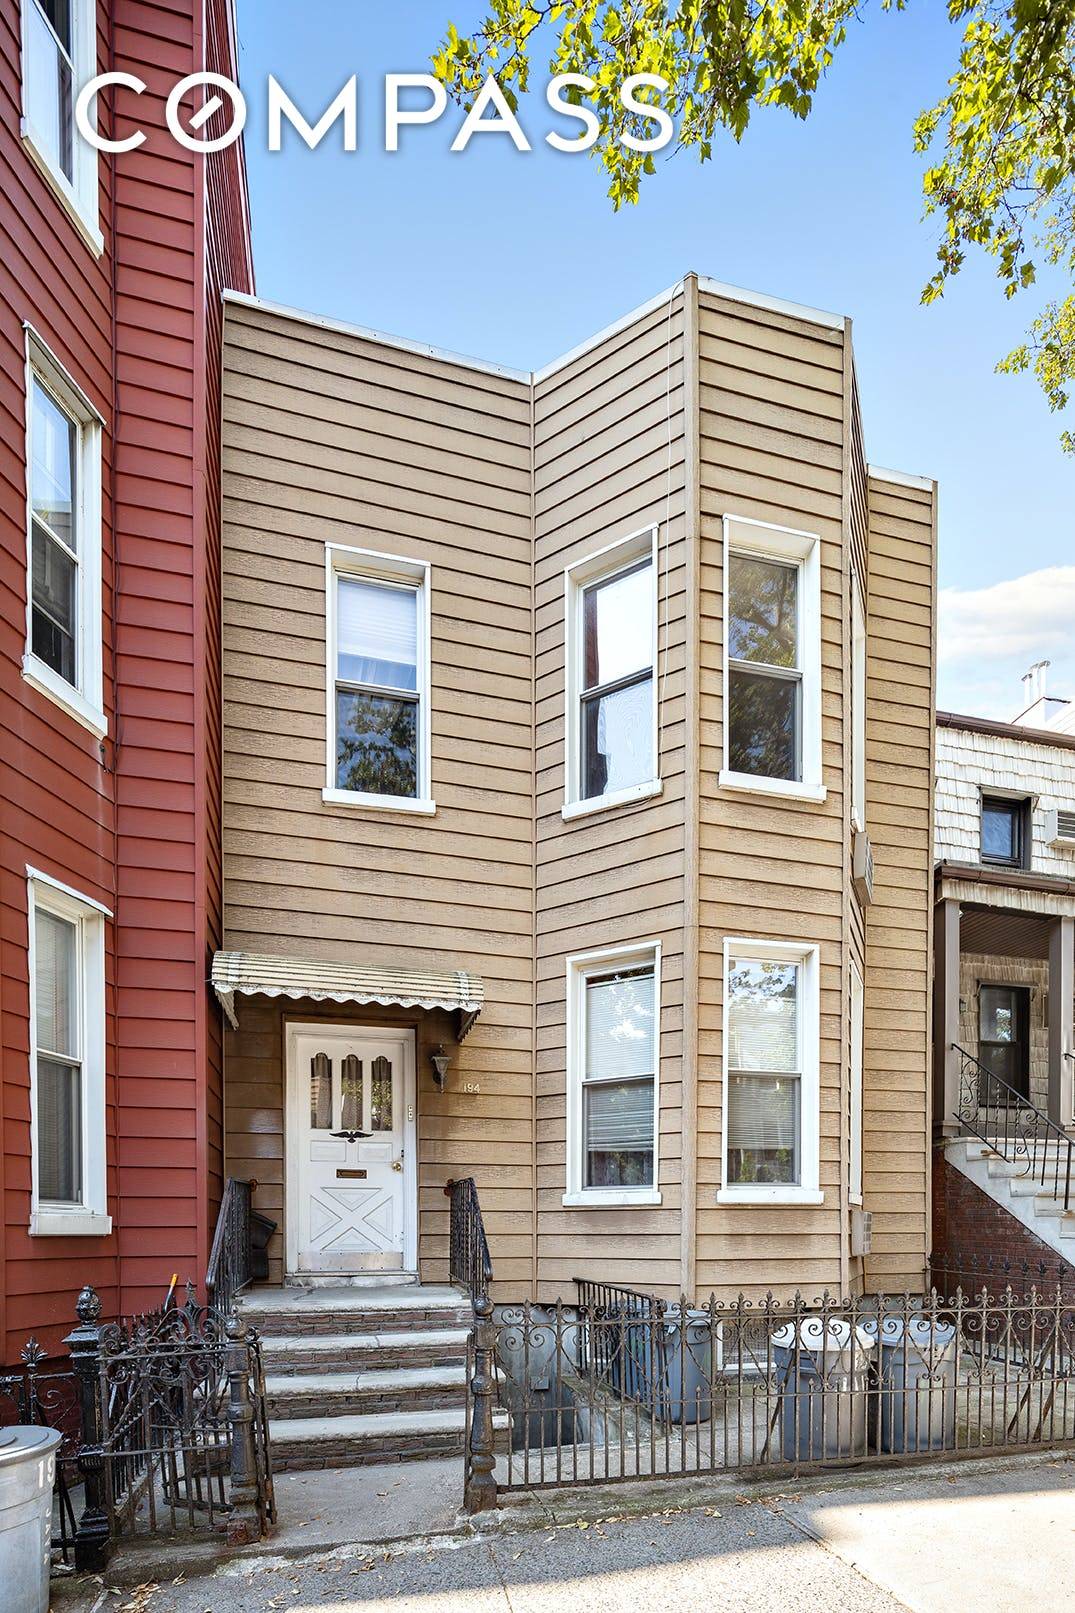 194 Java Street is 22 foot wide 2 family townhouse in the heart of Greenpoint on a beautiful tree lined street.